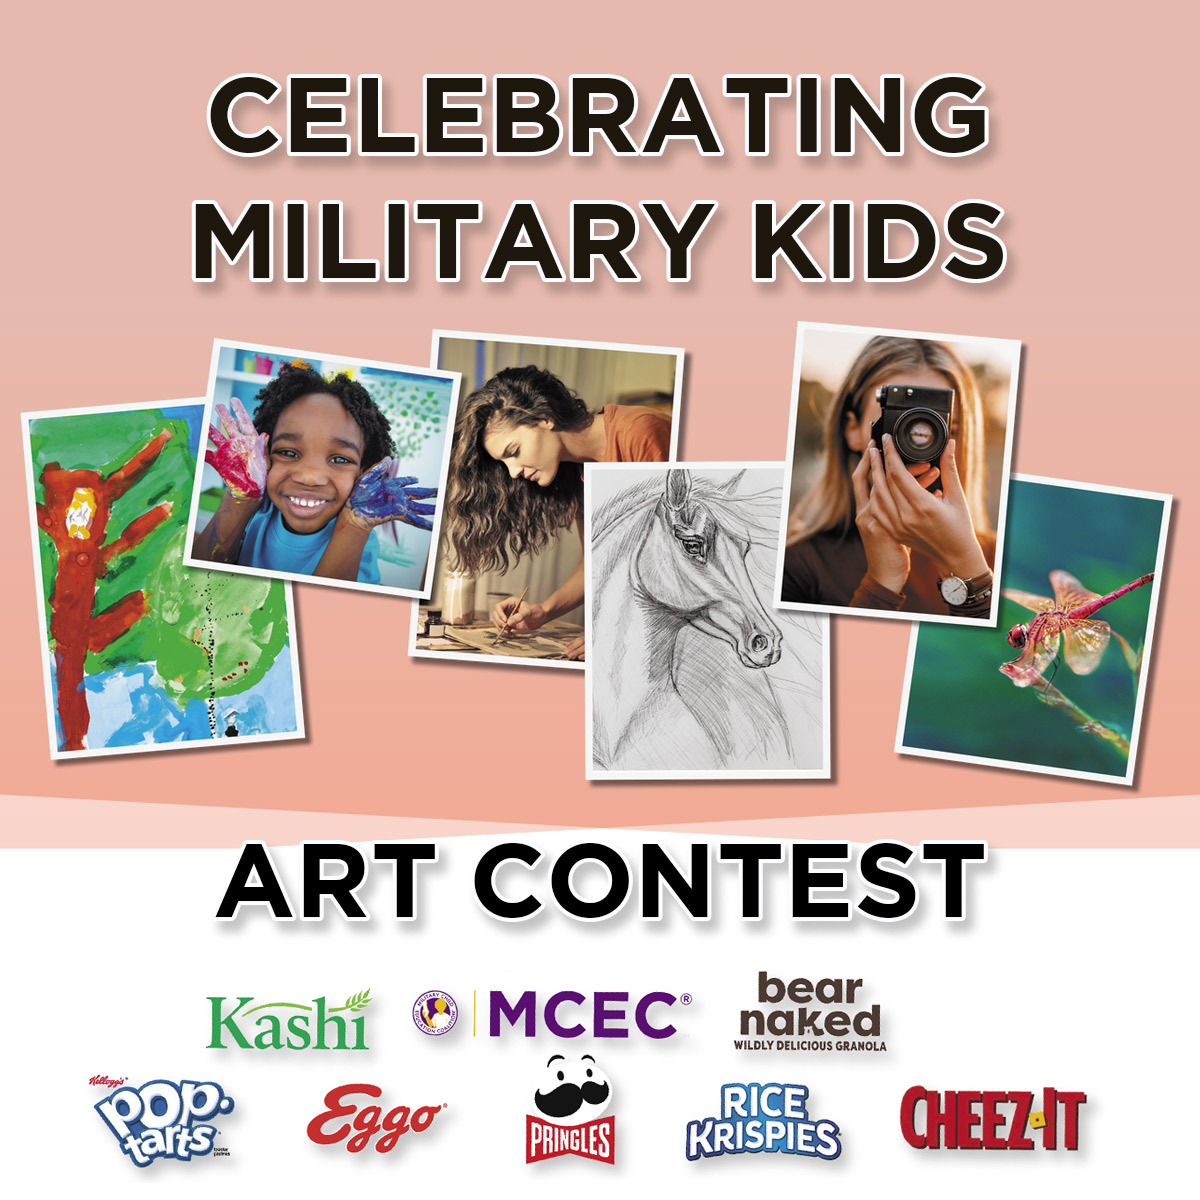 Calling all military kids! 🎉 Our favorite brands and friends at the Commissary & Exchange launched the Celebrating Military Kids art contest! 🎨 Check out the contest here and let your creativity shine! ✨ celebratingmilitarykids.com